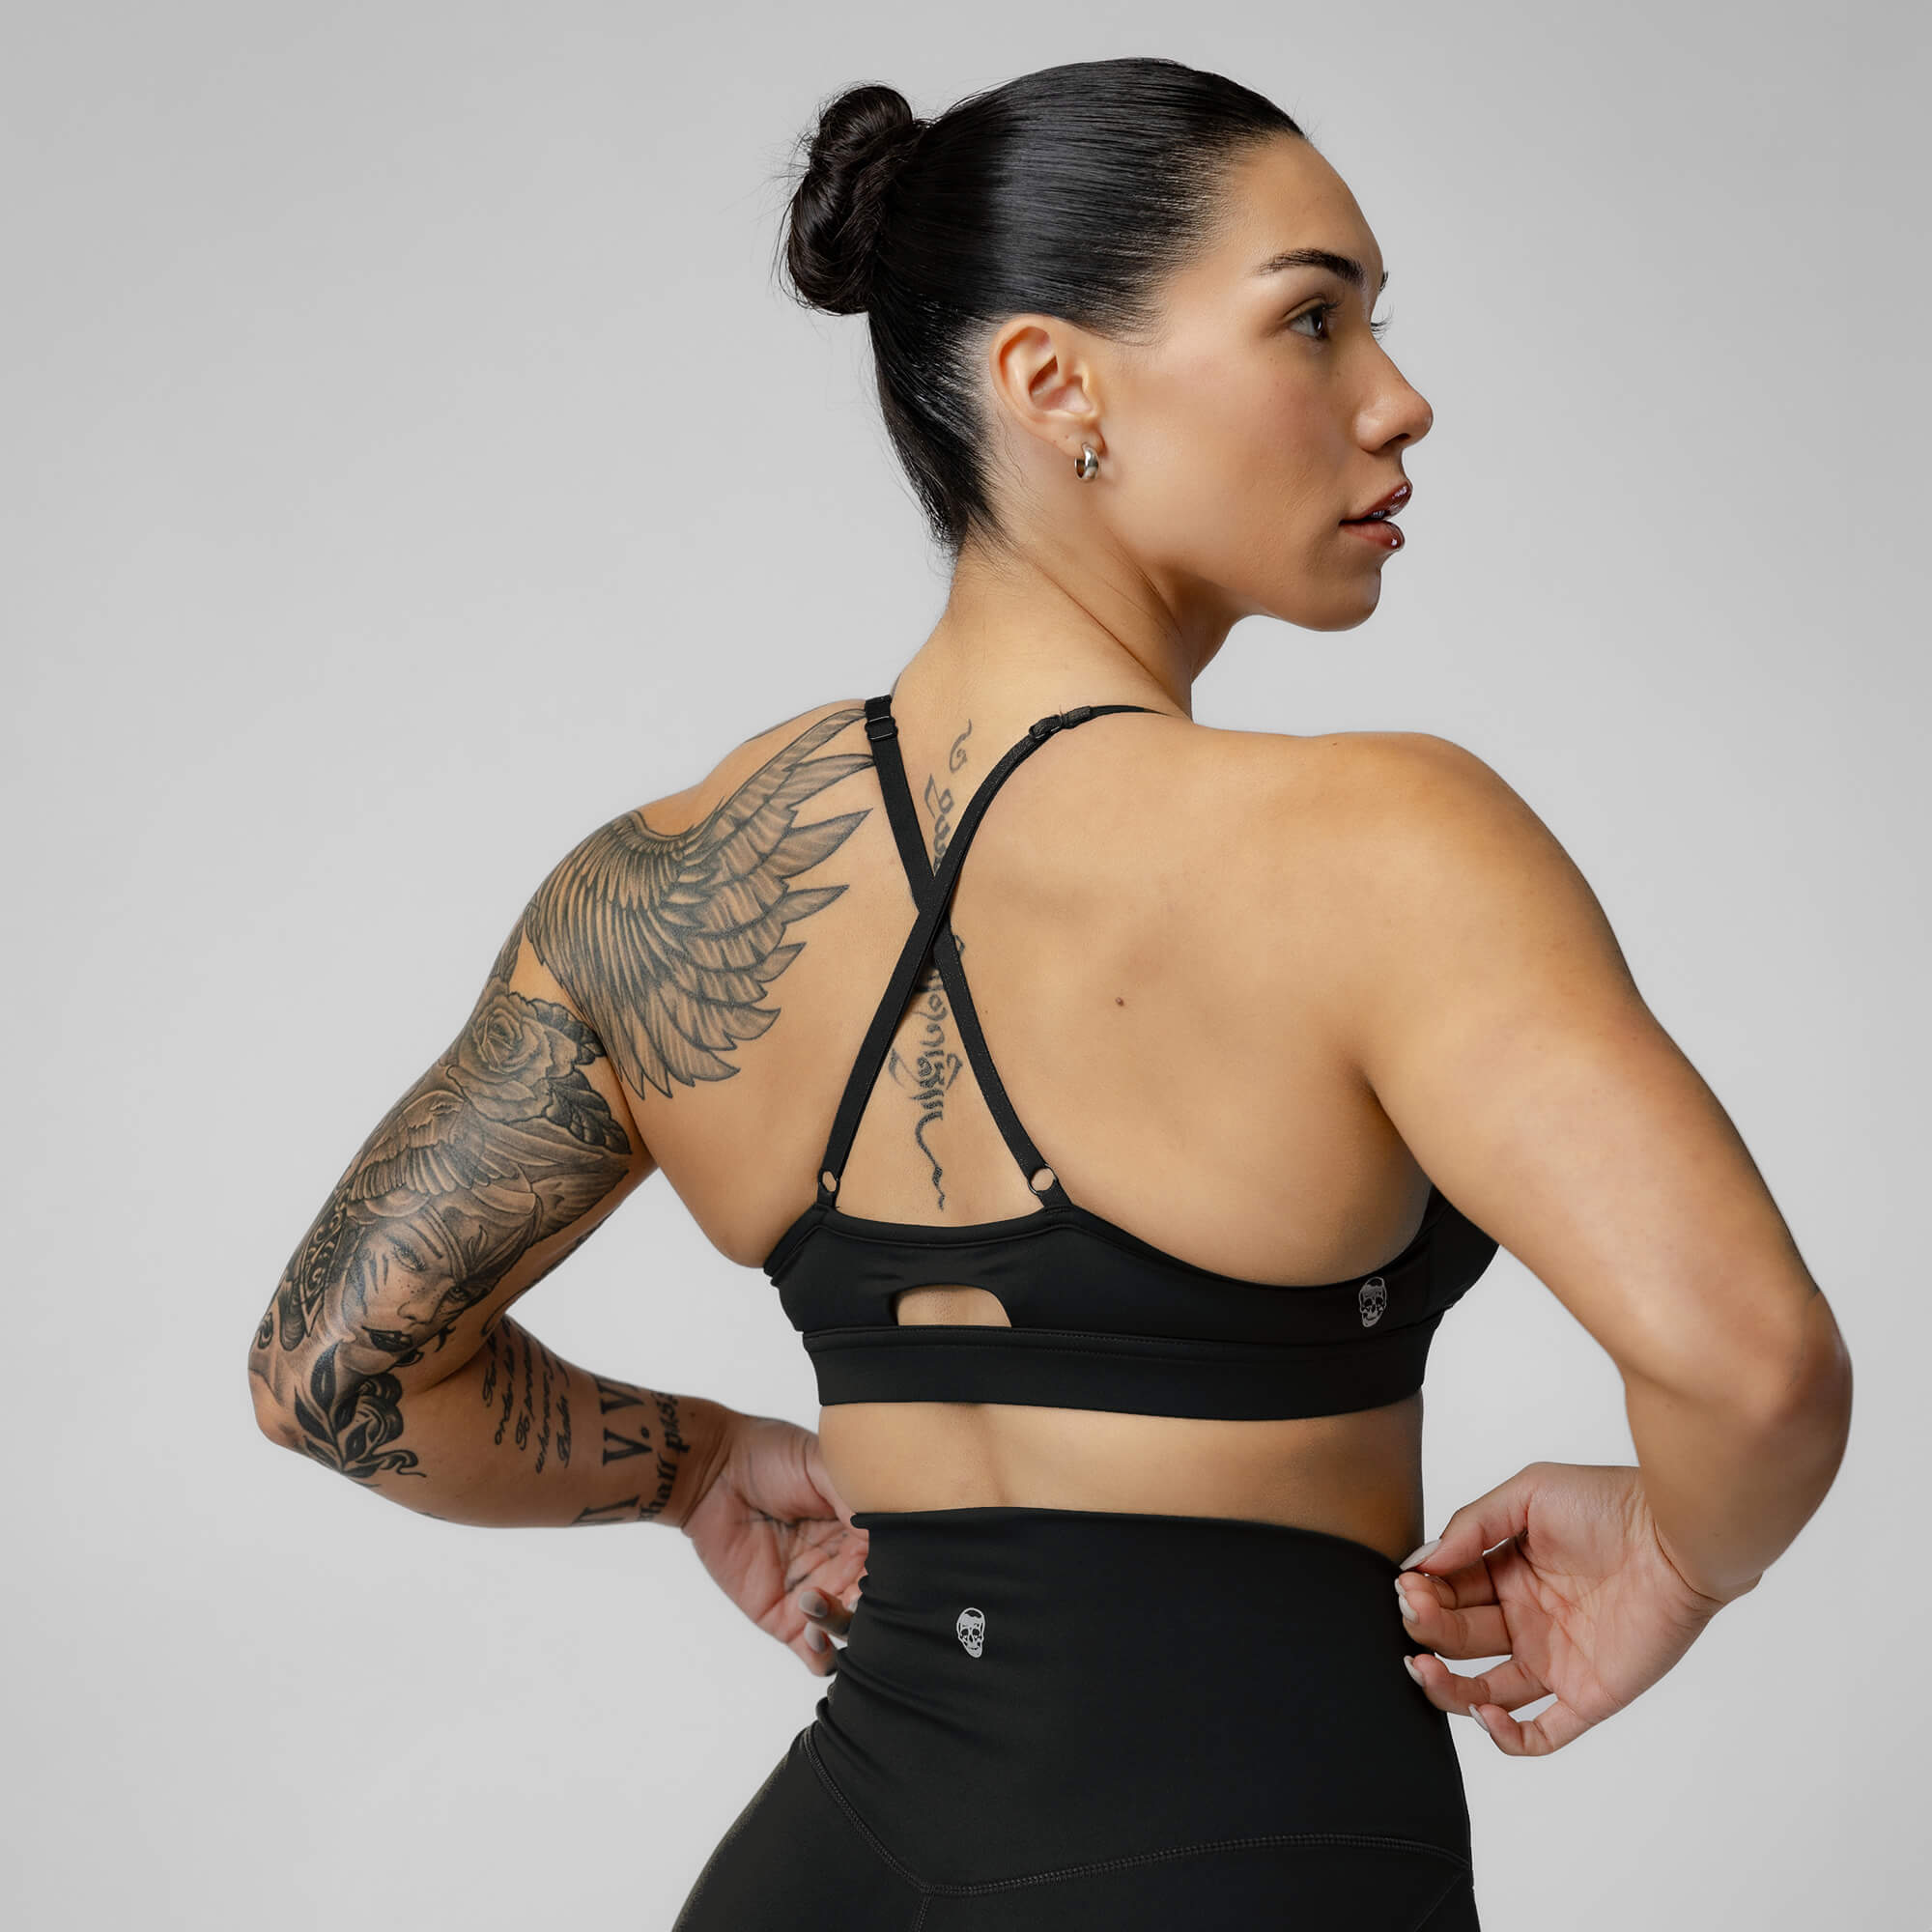 Gym Exercise Support Sports Bra - Black - GYMVERSUS